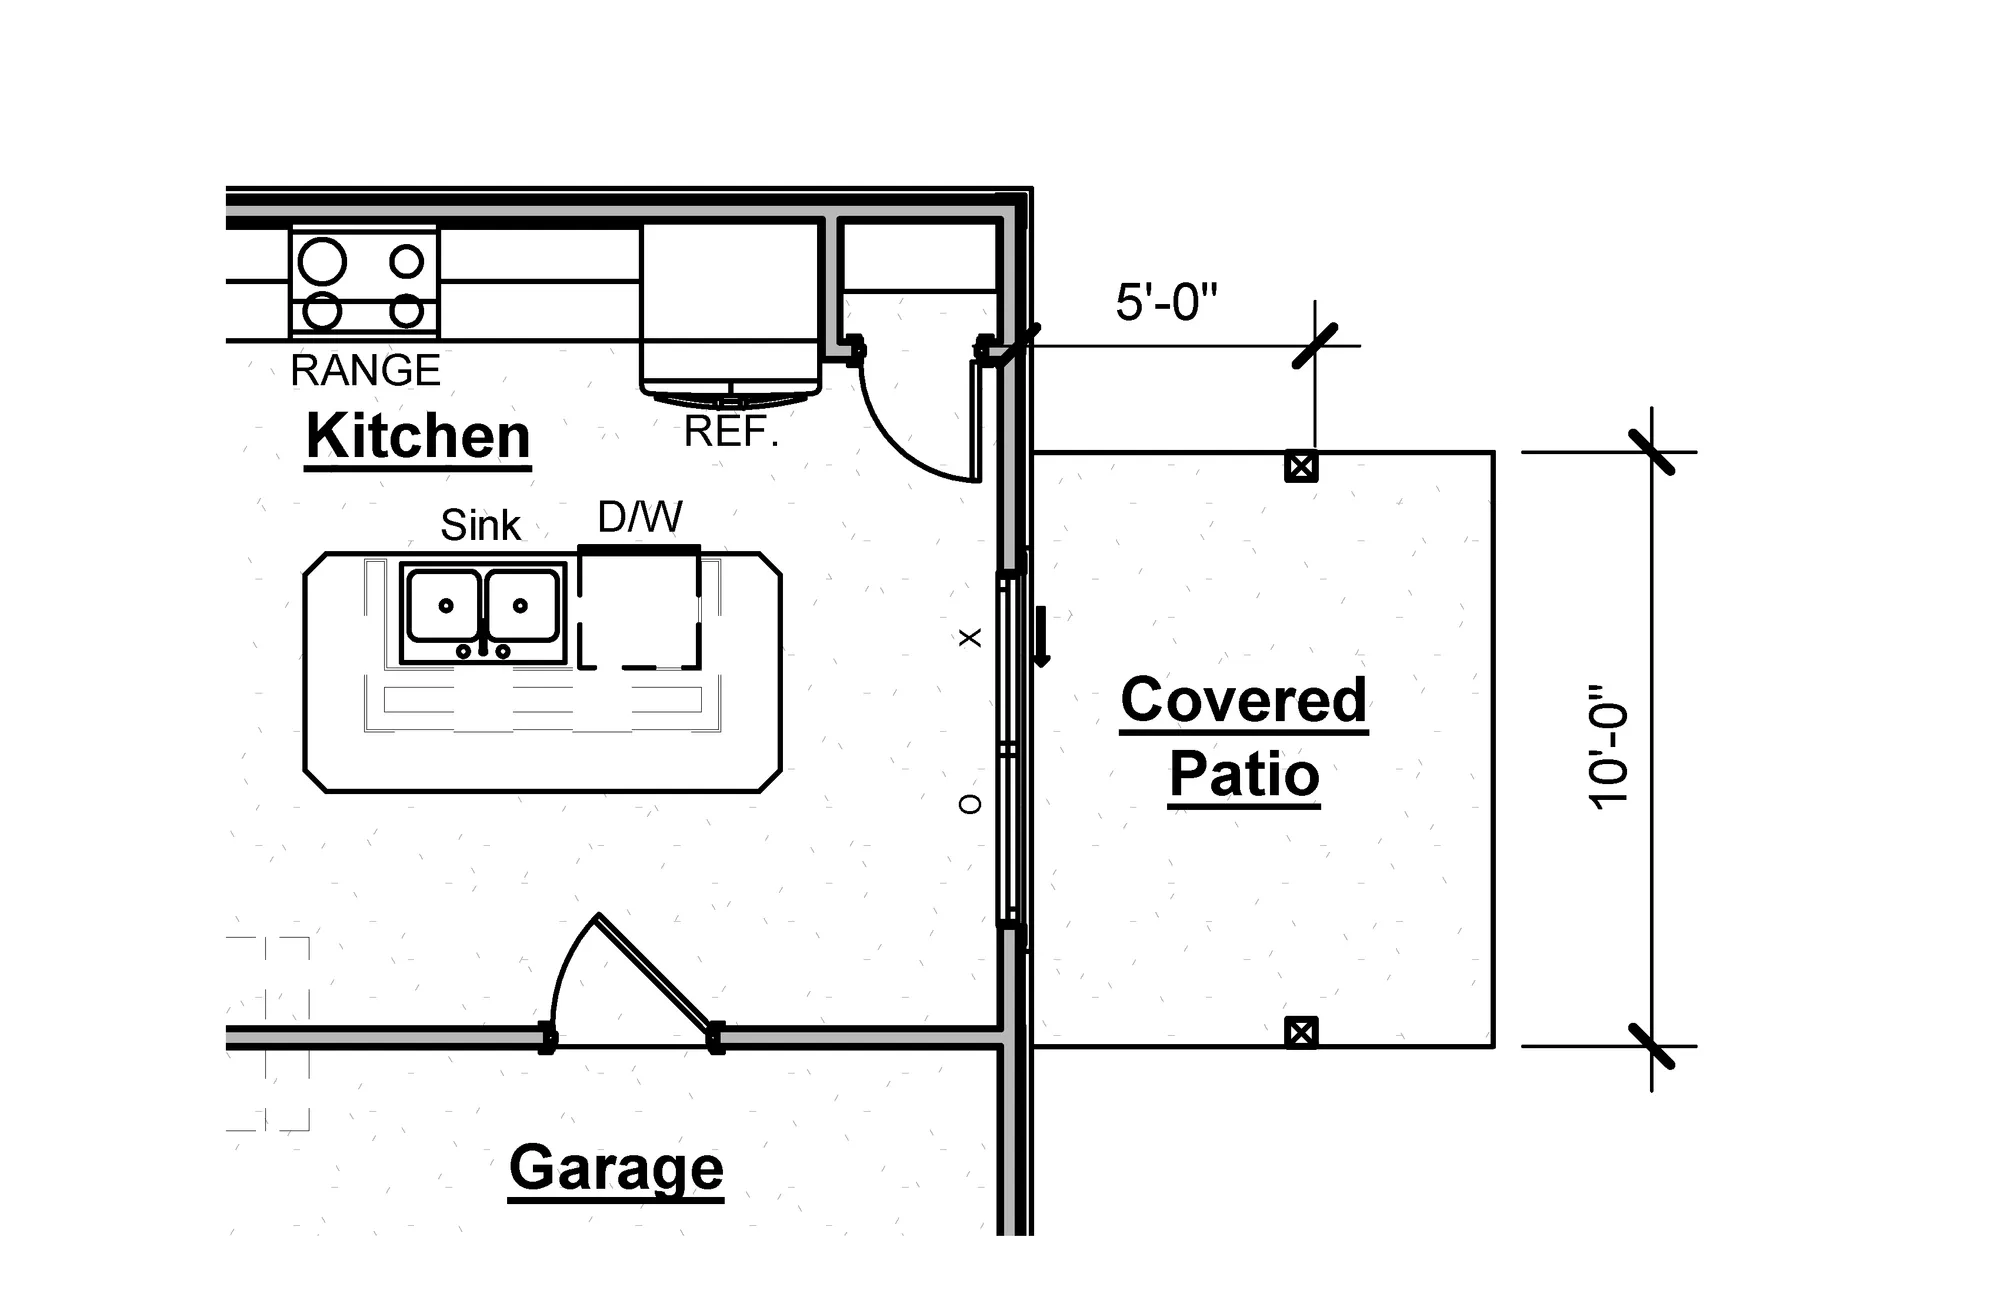 Covered Patio Option - undefined